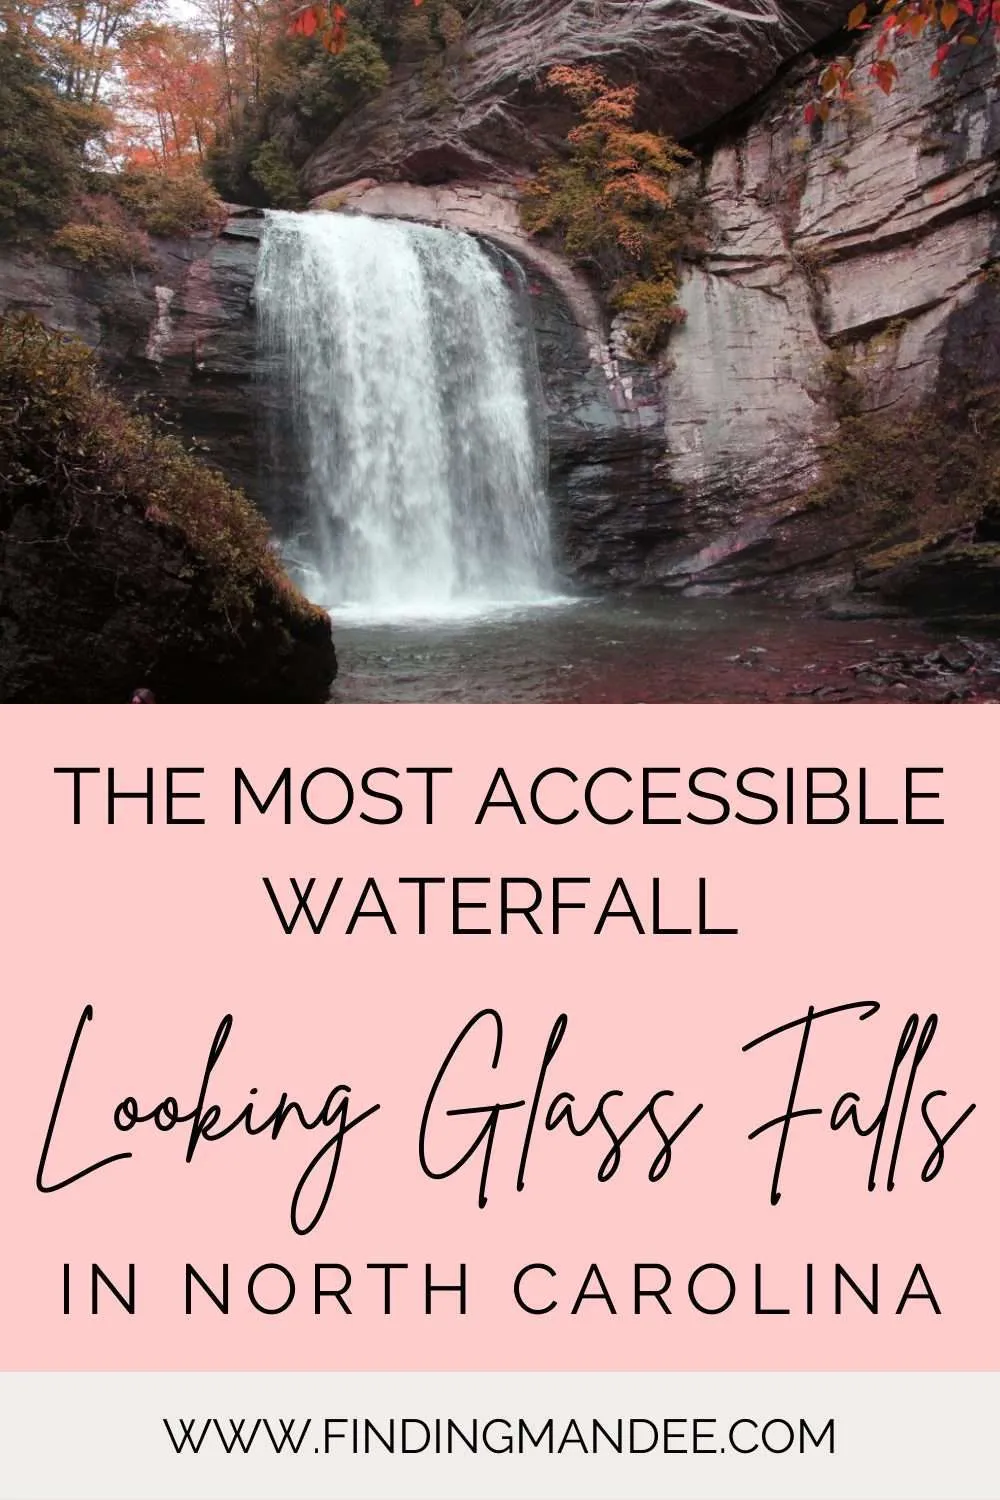 This waterfall in North Carolina is wheelchair accessible: Looking Glass Falls | Finding Mandee